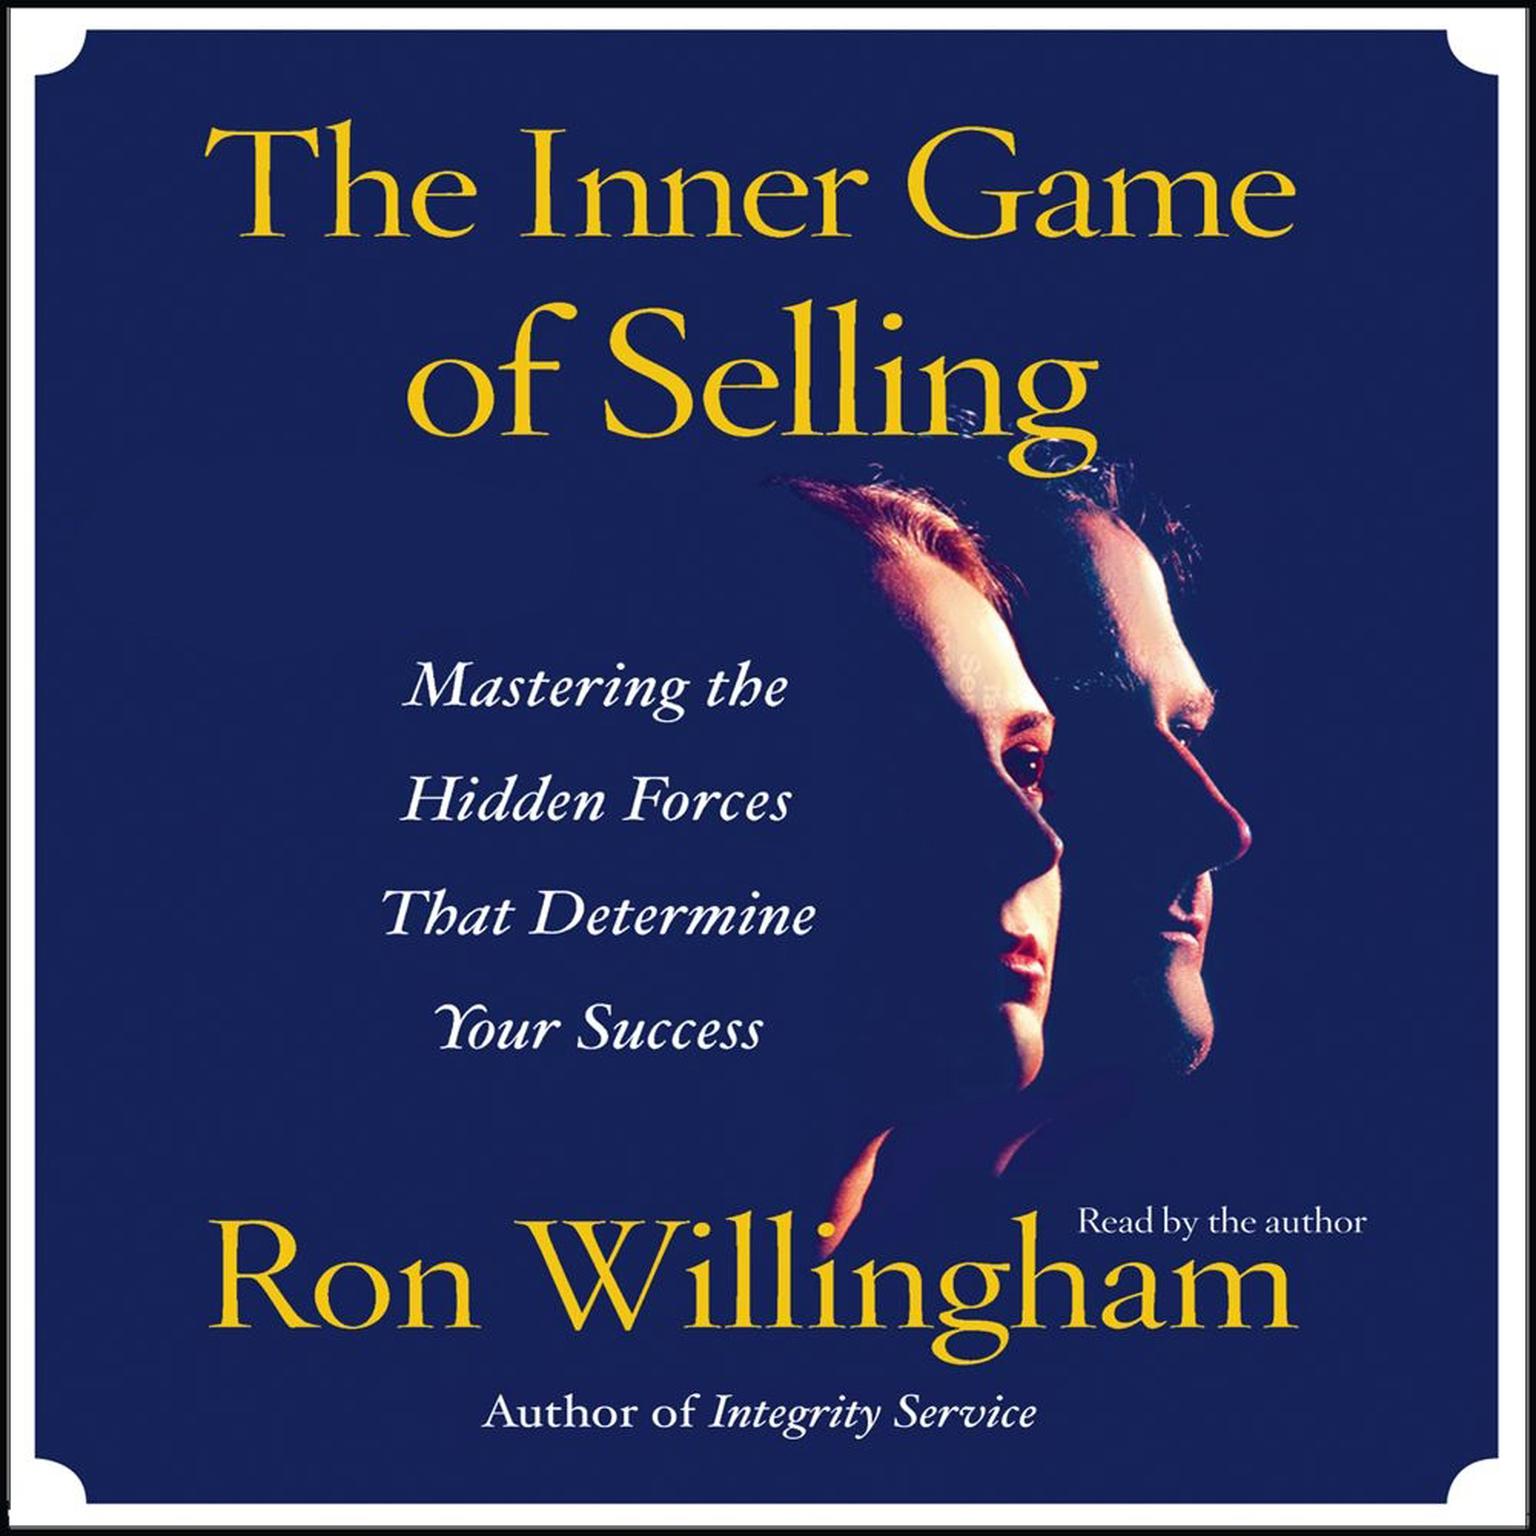 The Inner Game of Selling (Abridged): Mastering the Hidden Forces that Determine Your Success Audiobook, by Ron Willingham